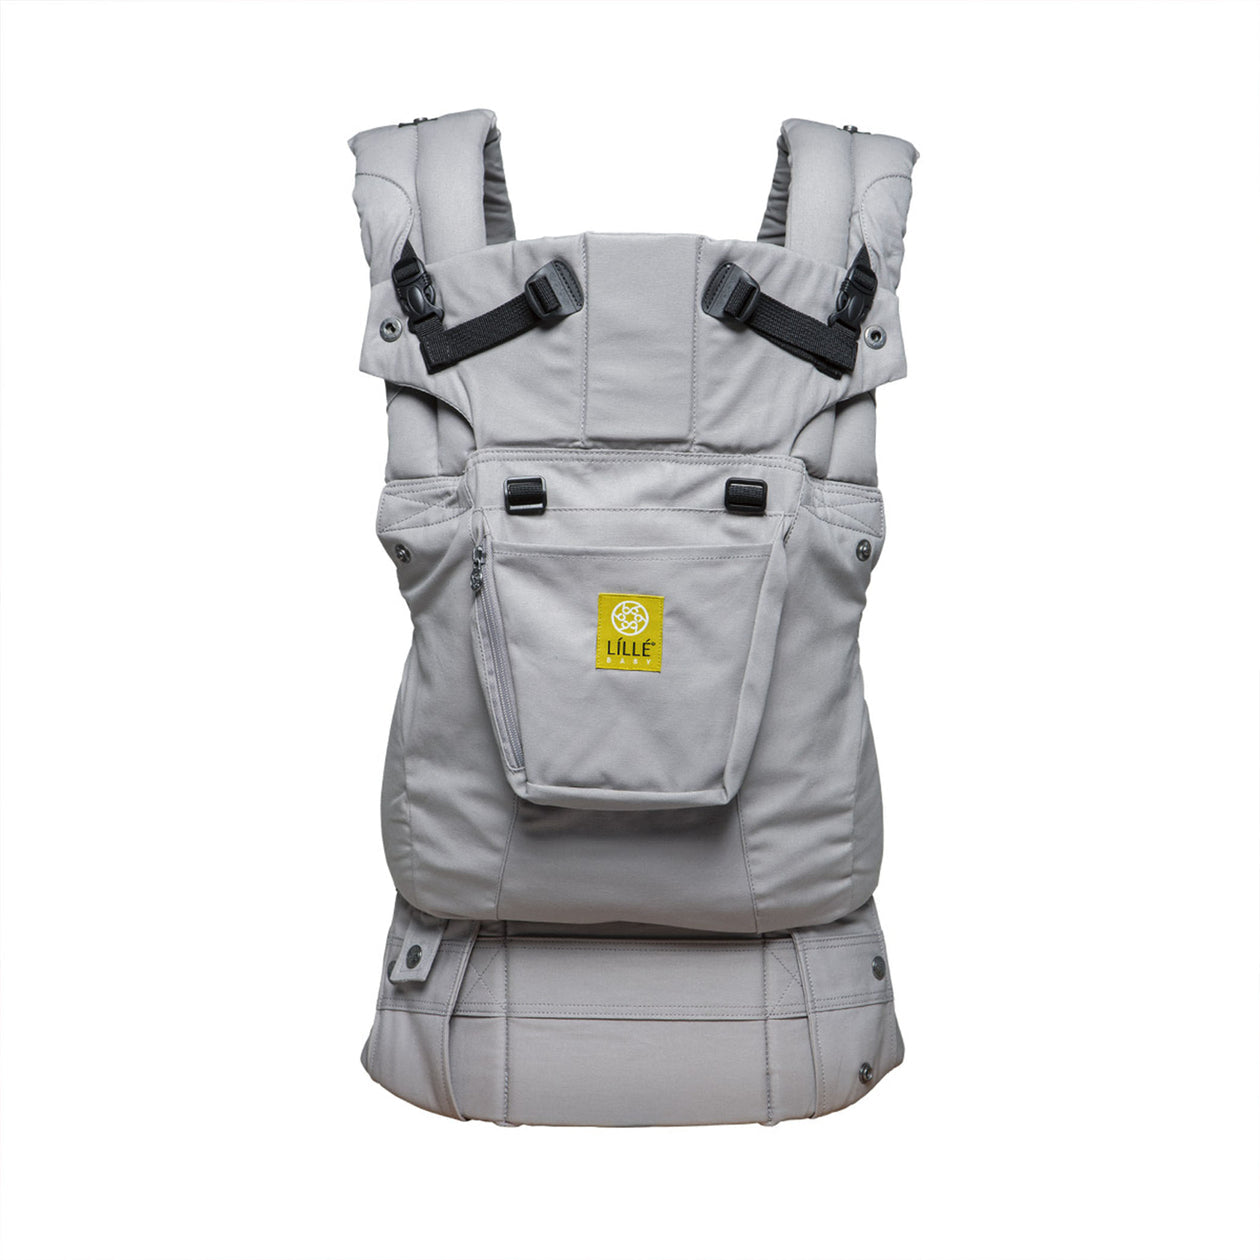 lillebaby complete original baby carrier in stone